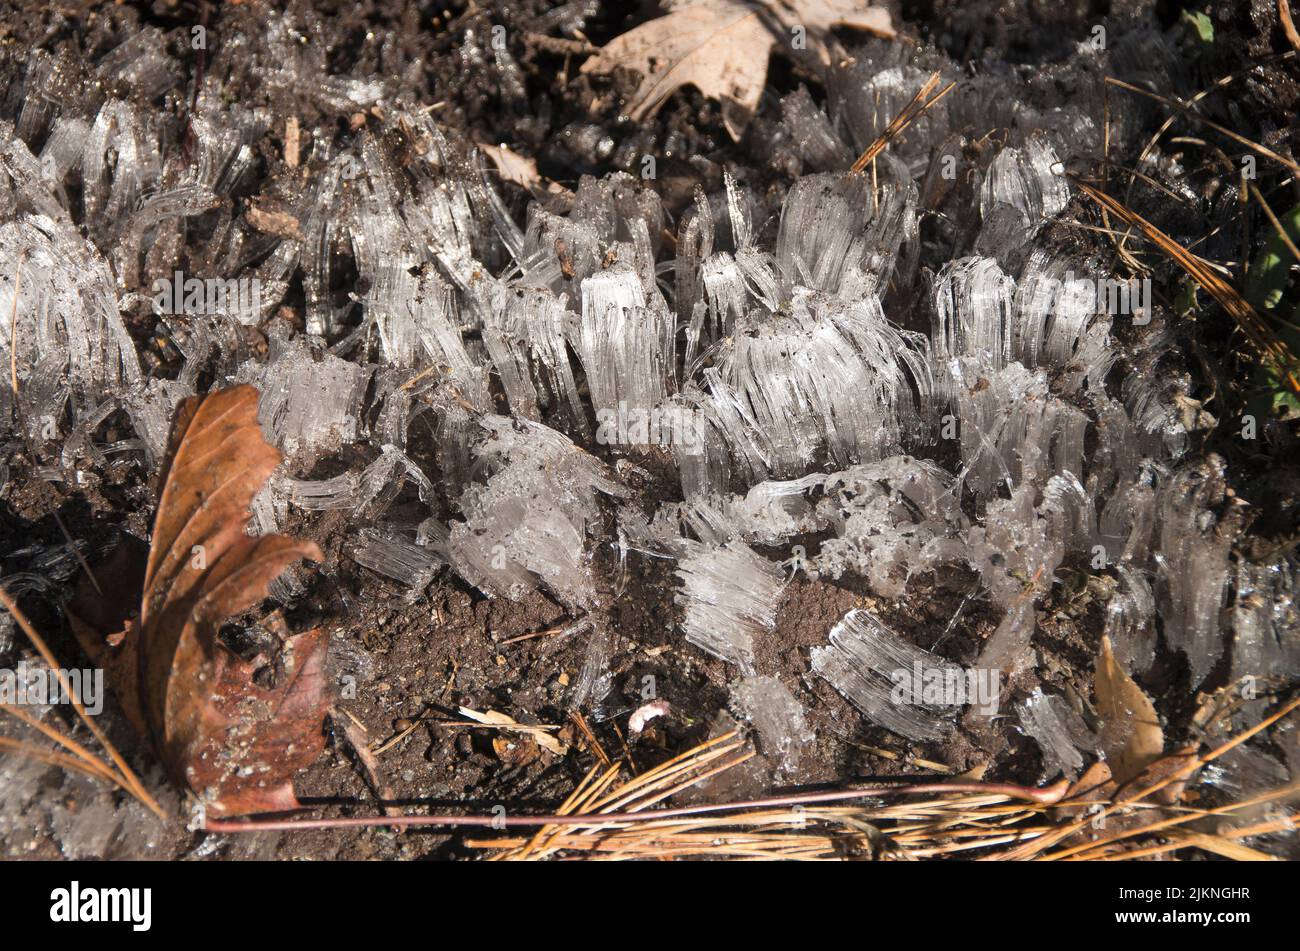 Ice from the dripping water from a house in Deep Creek Lake forms ice crystal threads benath the eaves of the structure. Stock Photo